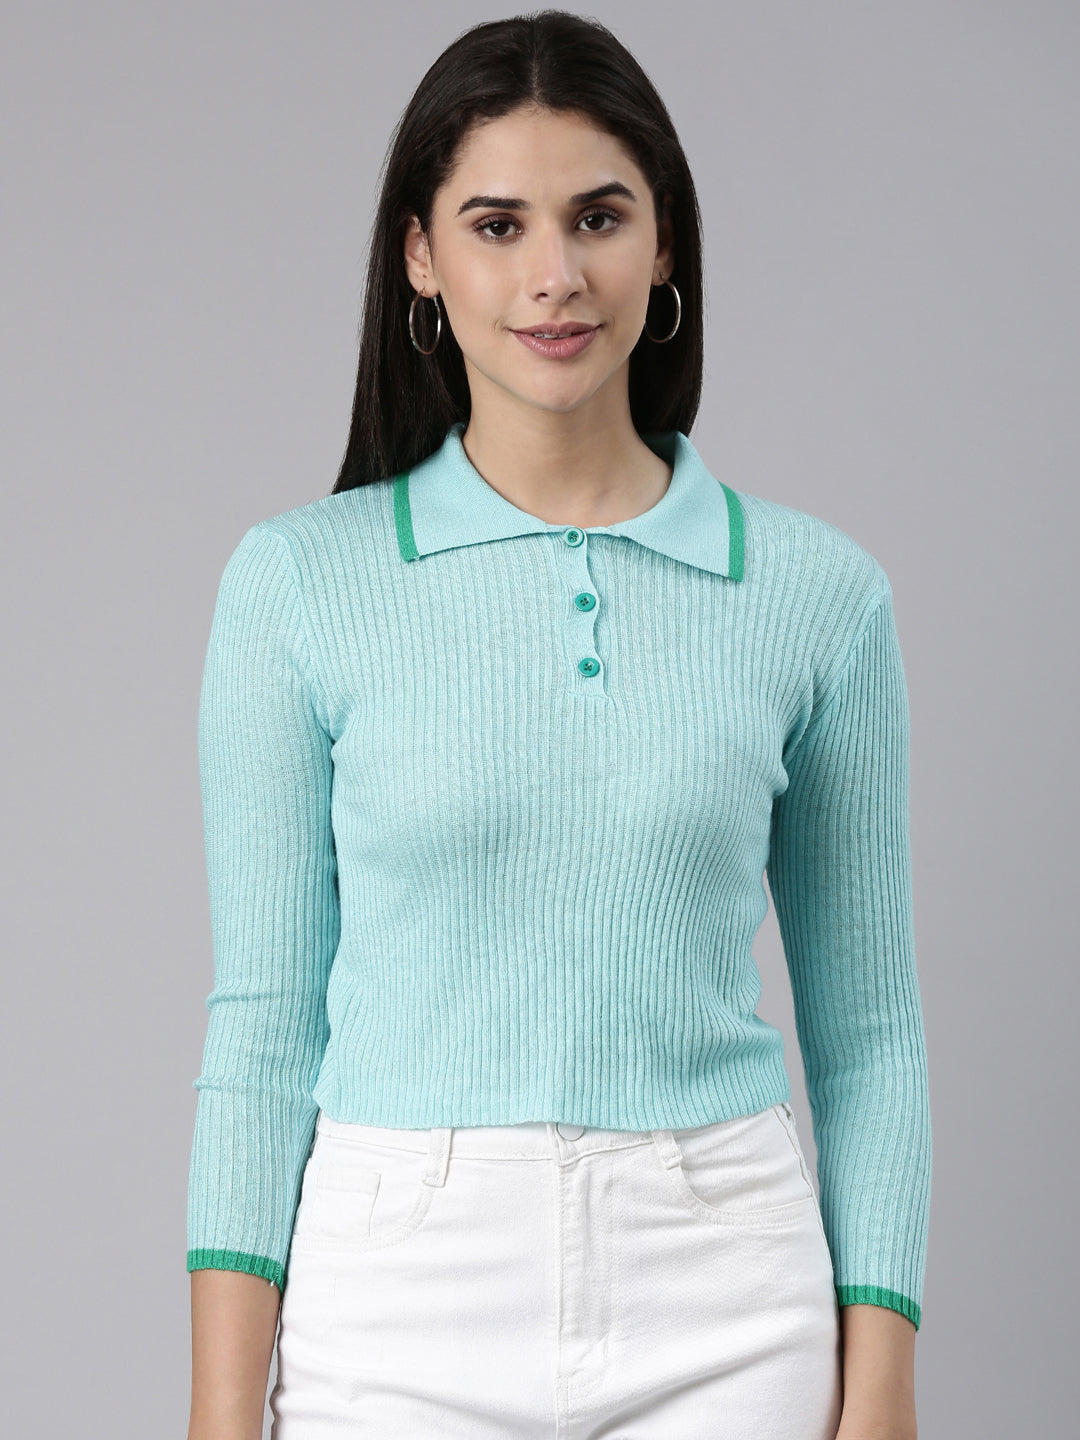 Above the Keyboard Collar Solid Regular Sleeves Fitted Turquoise Blue Regular Top